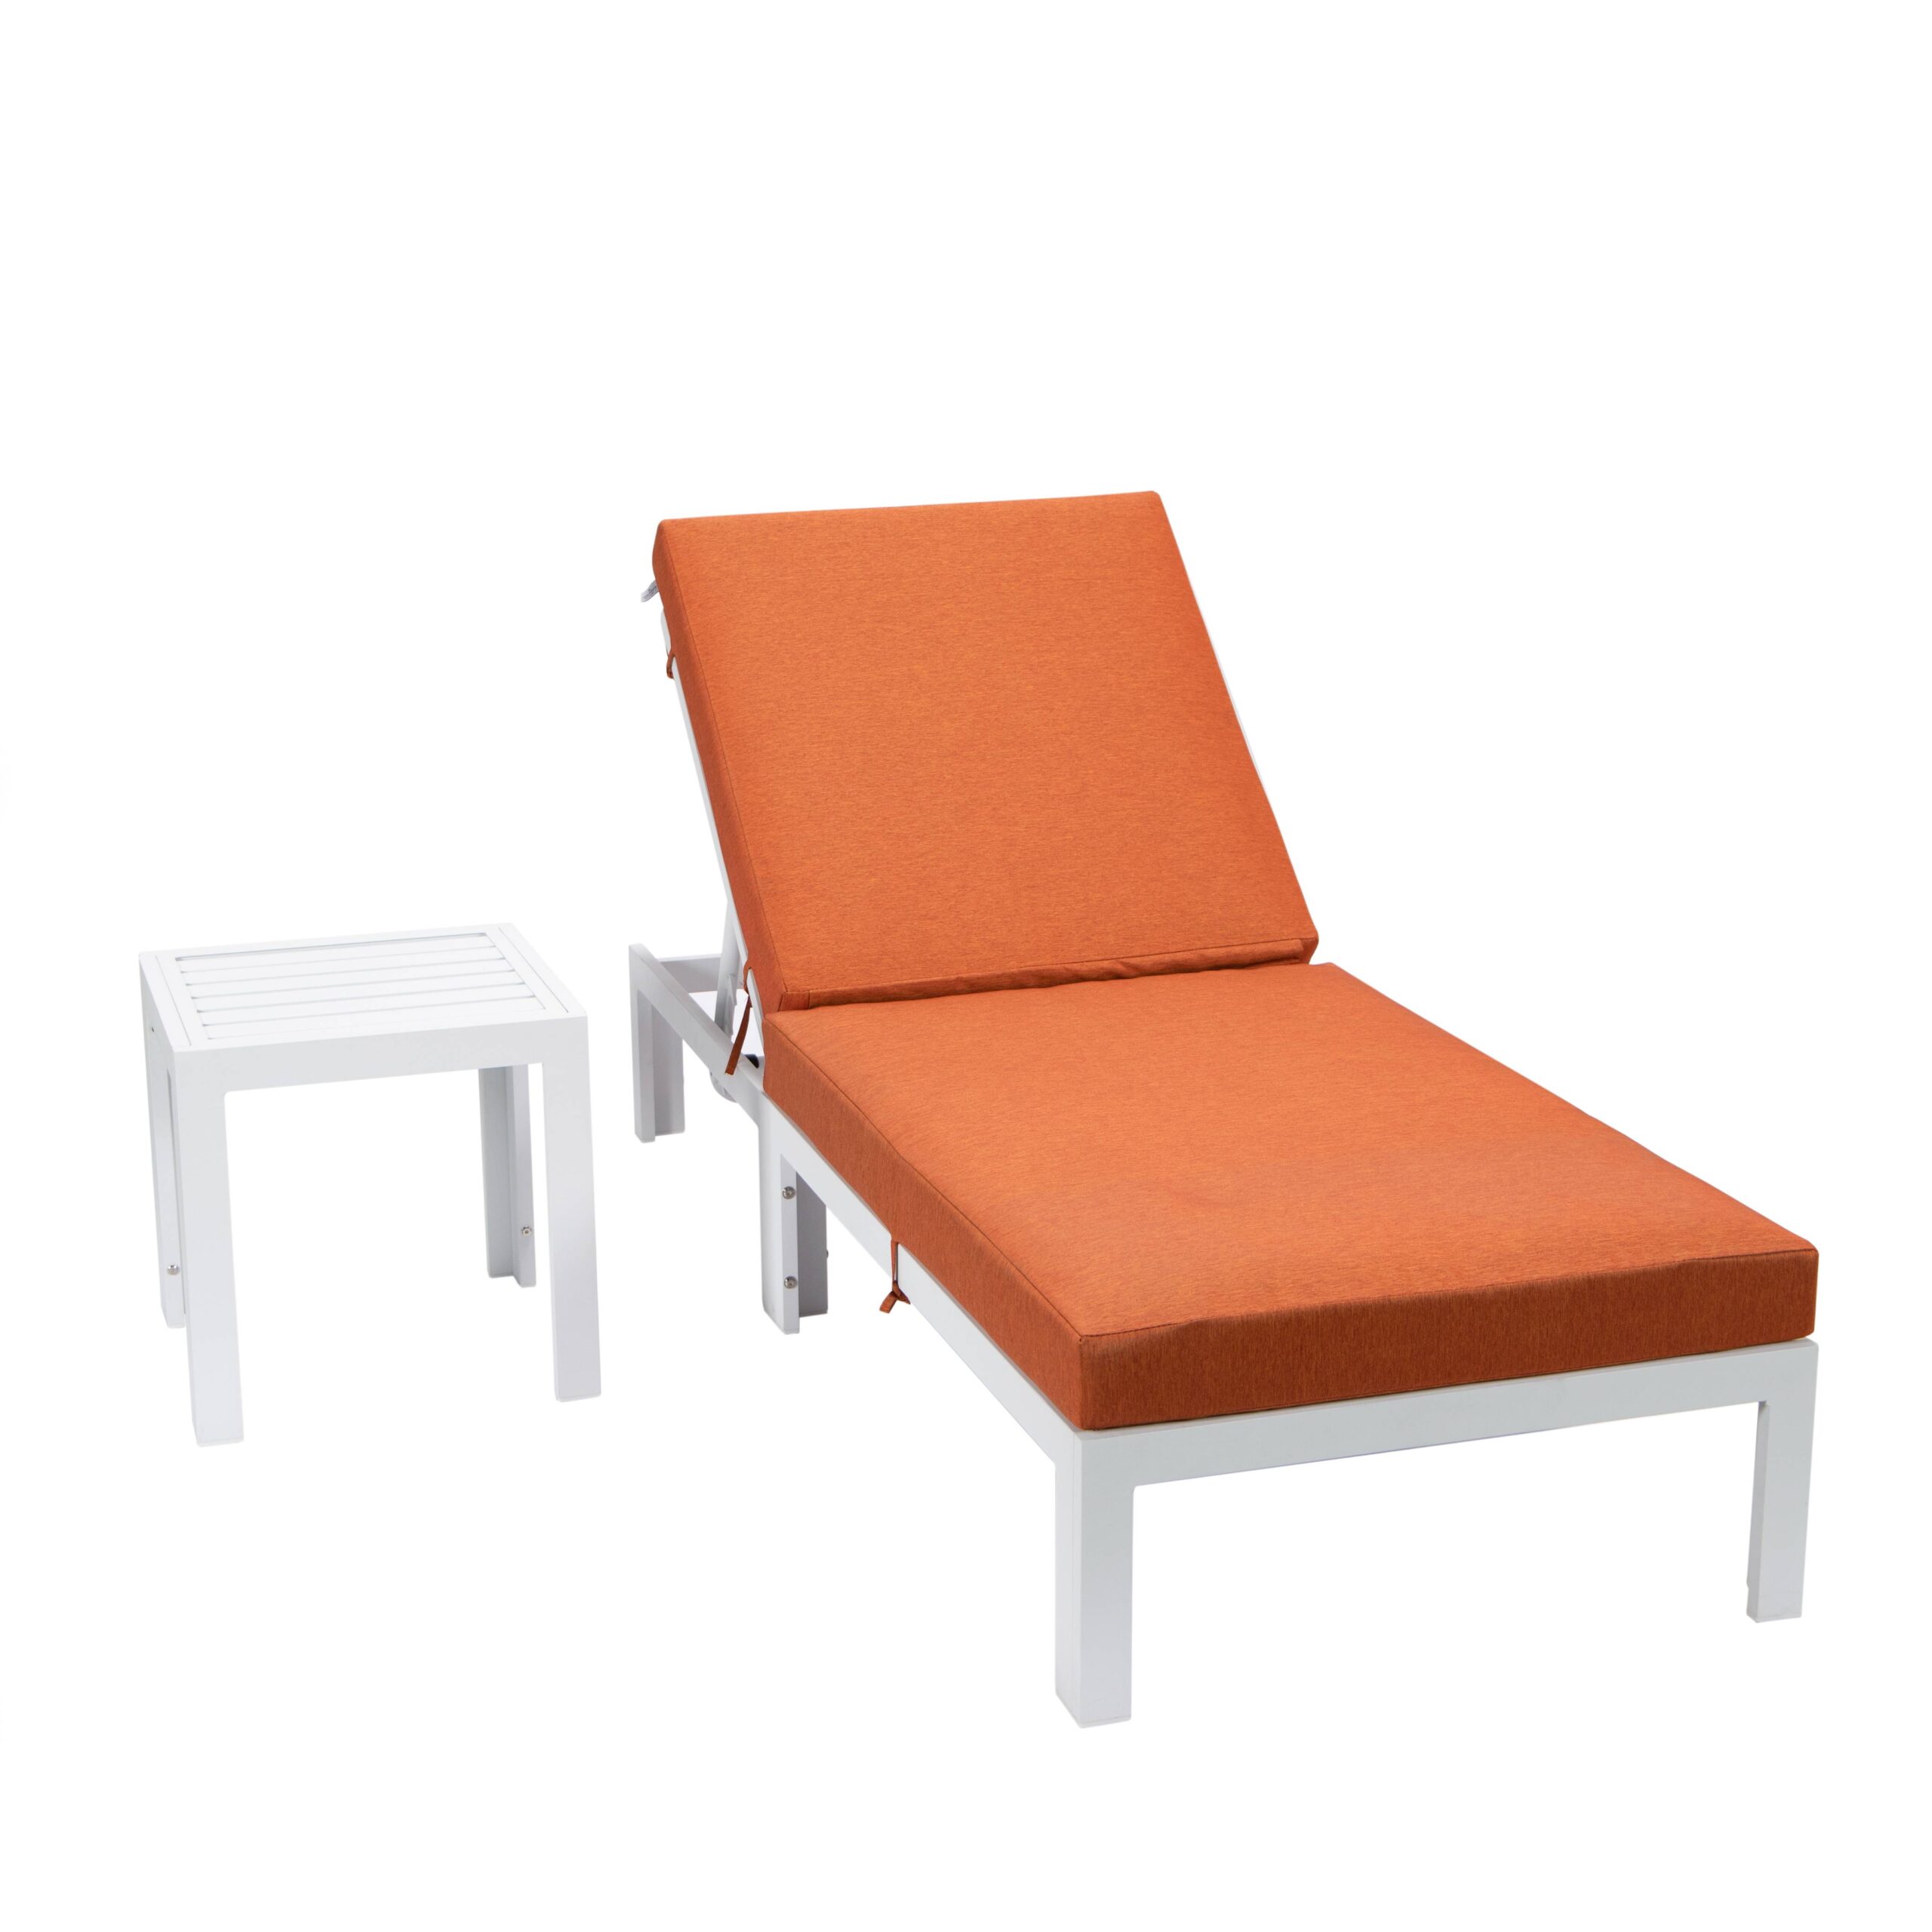 LeisureMod Chelsea Modern White Aluminum Outdoor Chaise Lounge Chair With Side Table & Orange Cushions - image 3 of 13